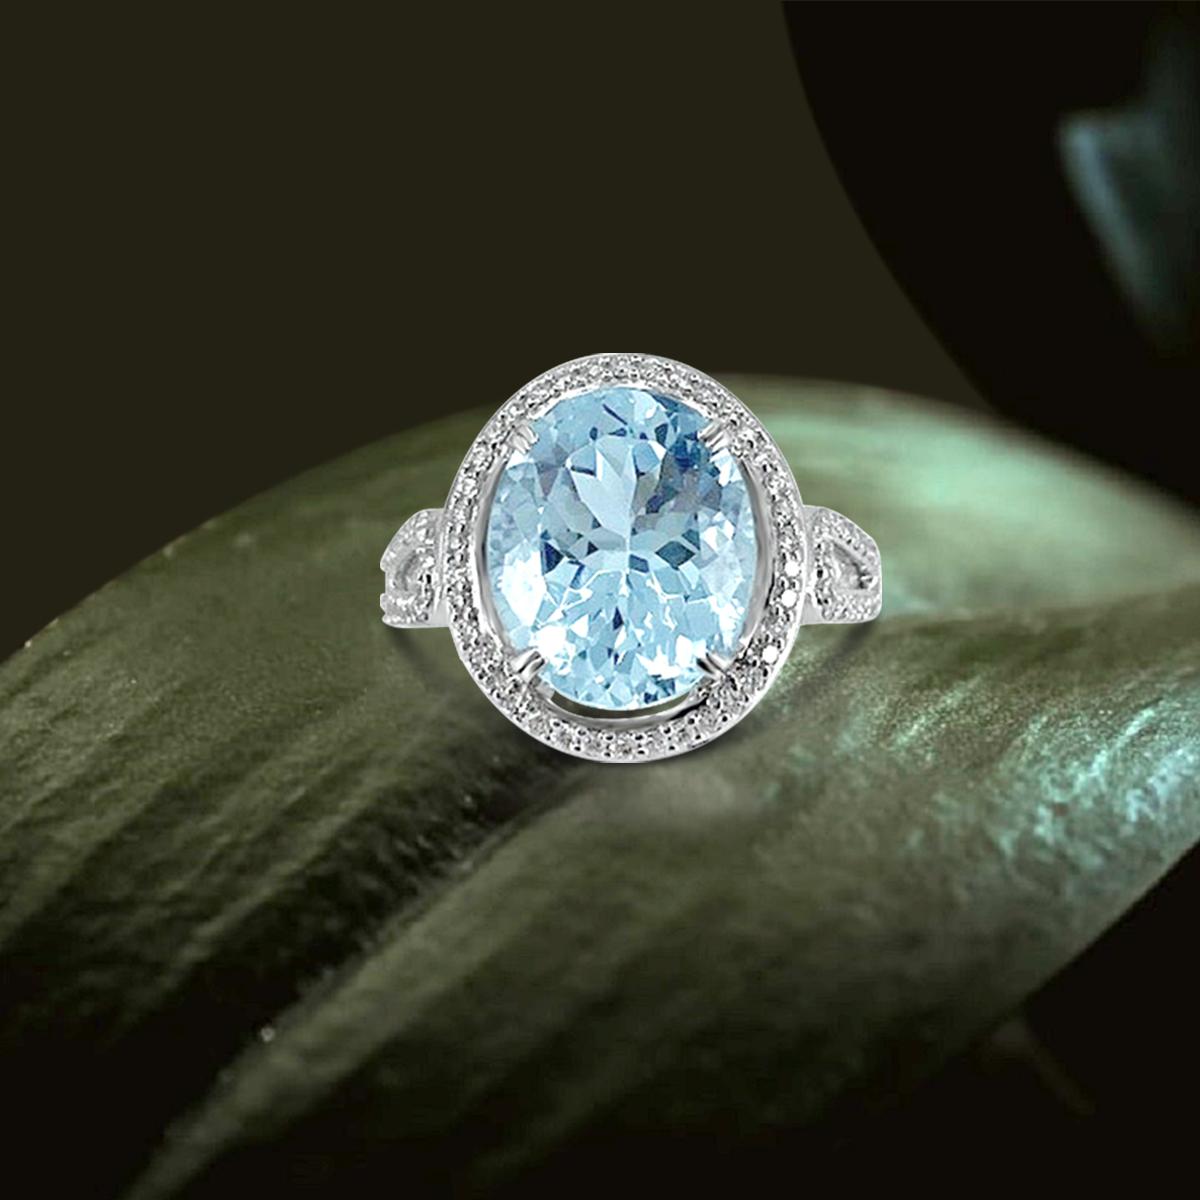 14K White Gold 4.22cts Aquamarine and Diamond Ring, Style# R3692AQ In New Condition For Sale In New York, NY